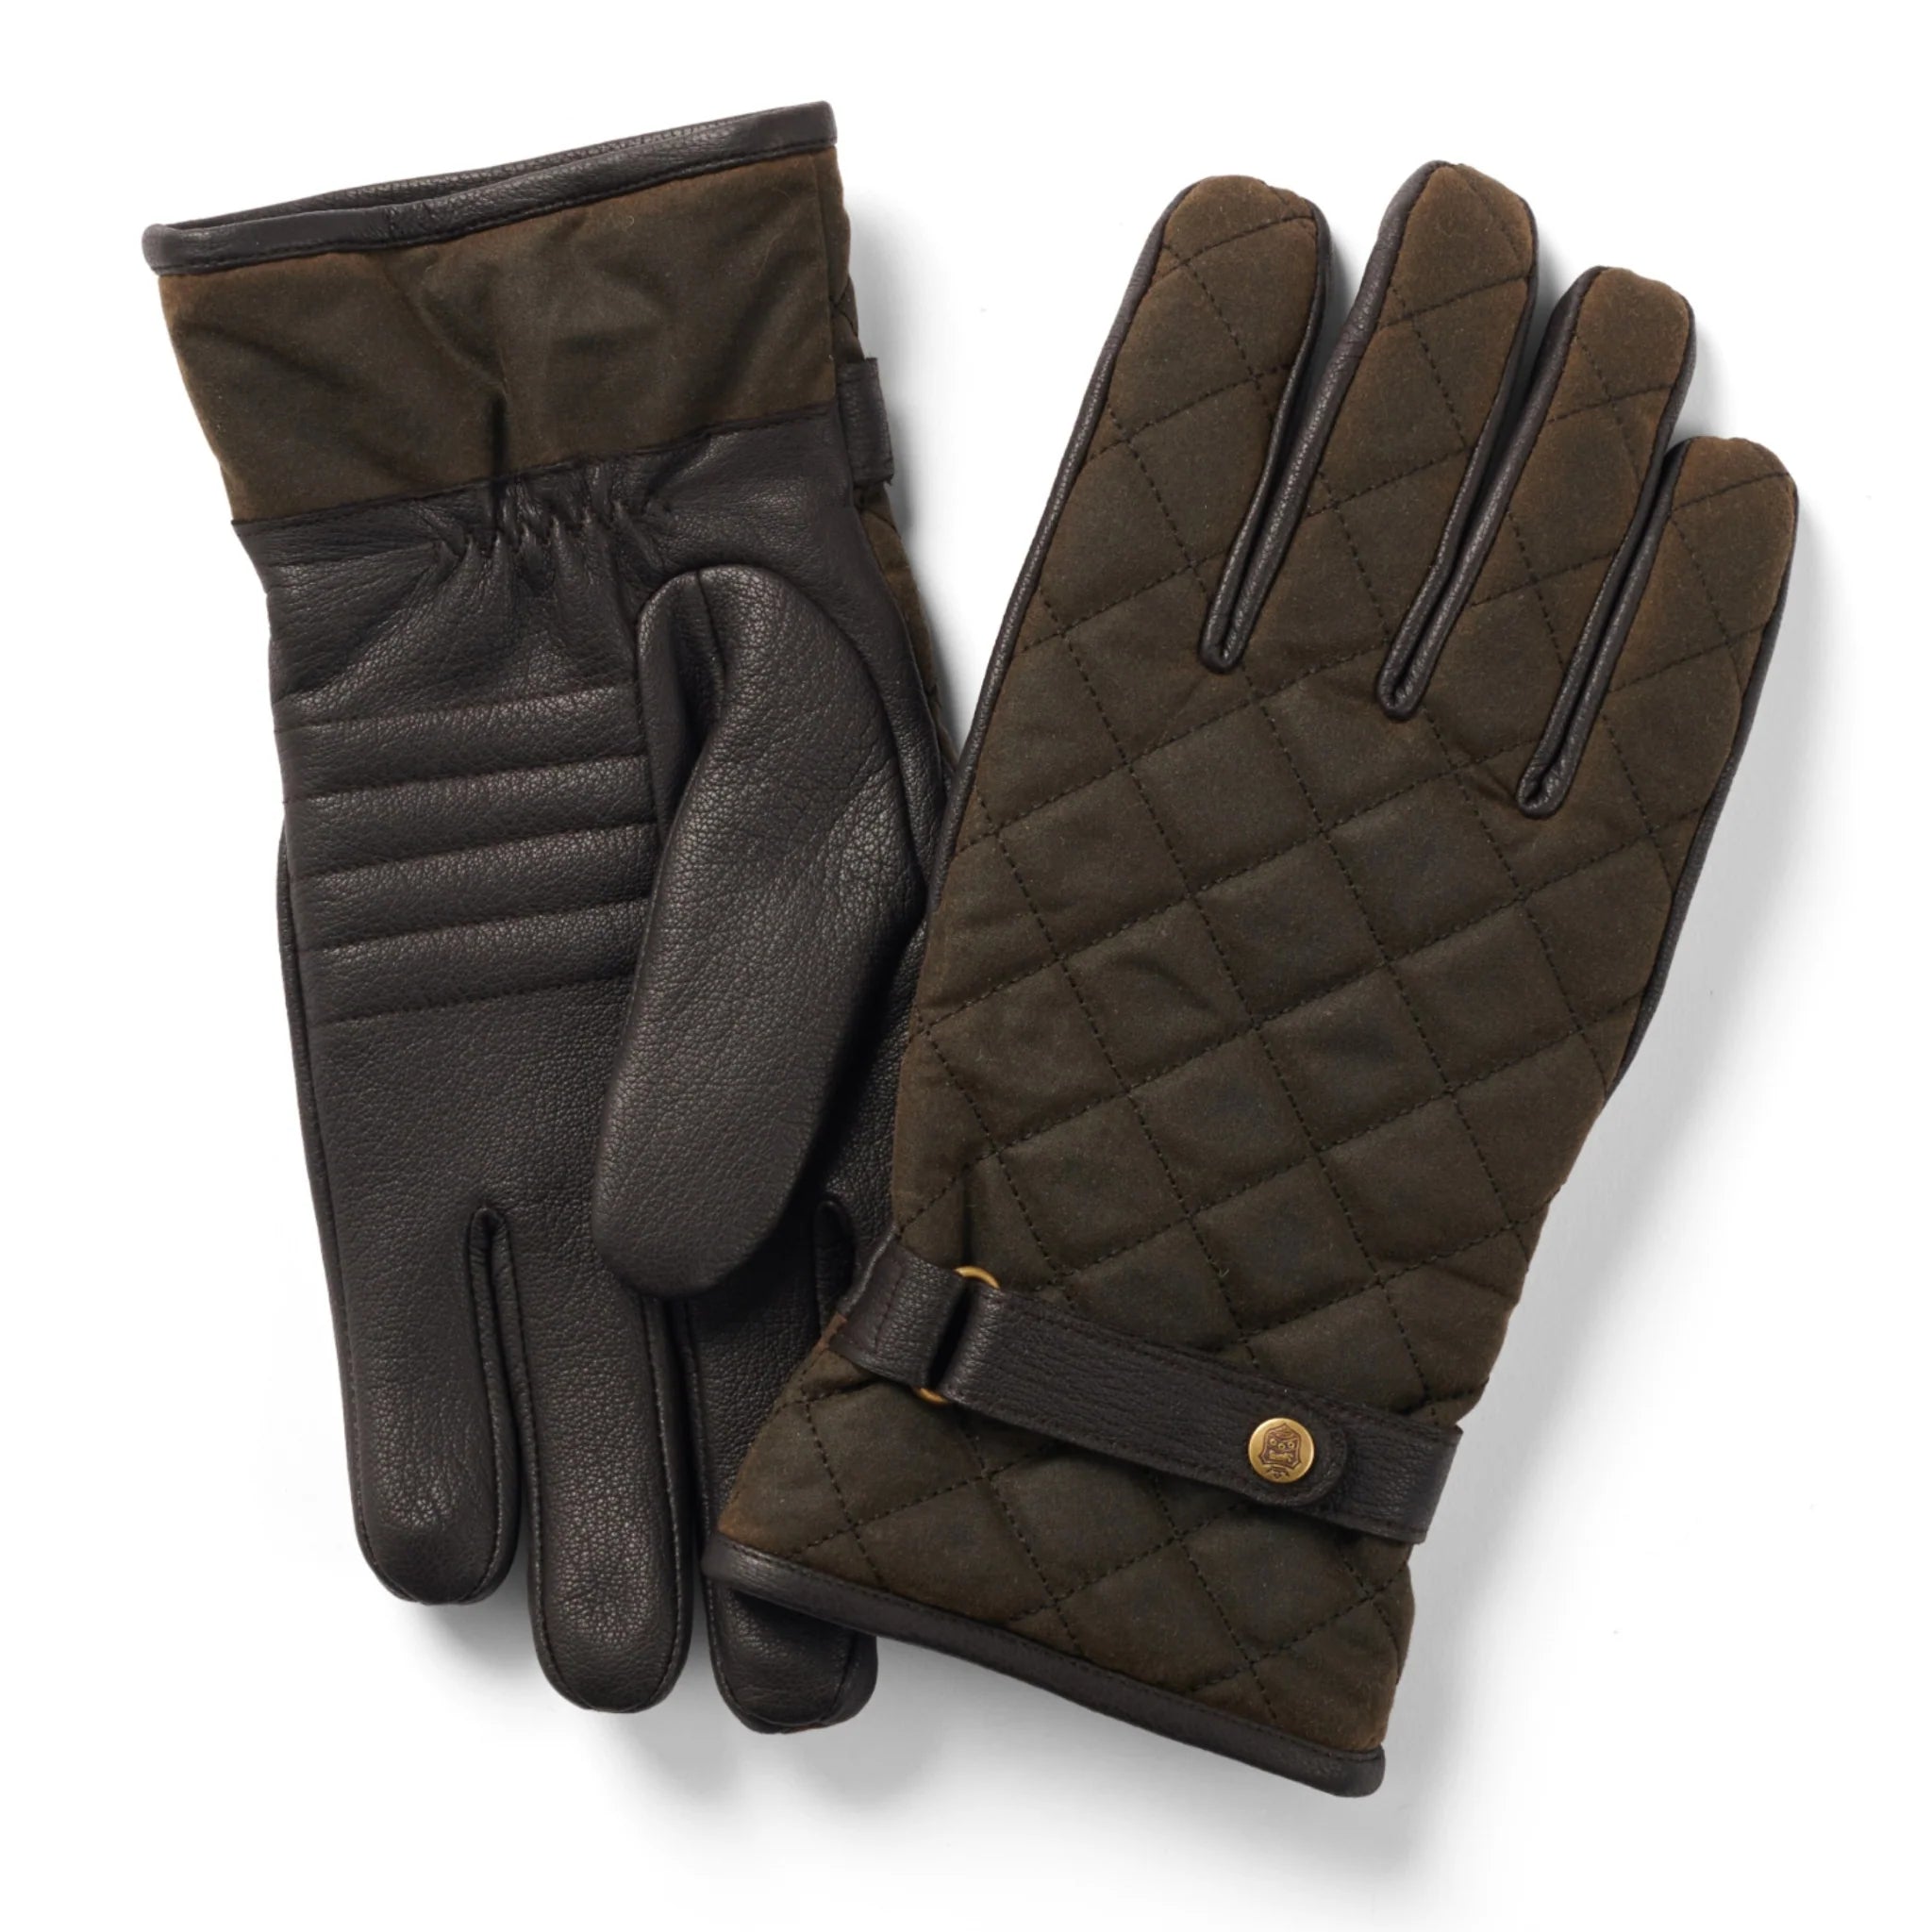 Failsworth Wax & Leather Touchscreen Gloves Olive